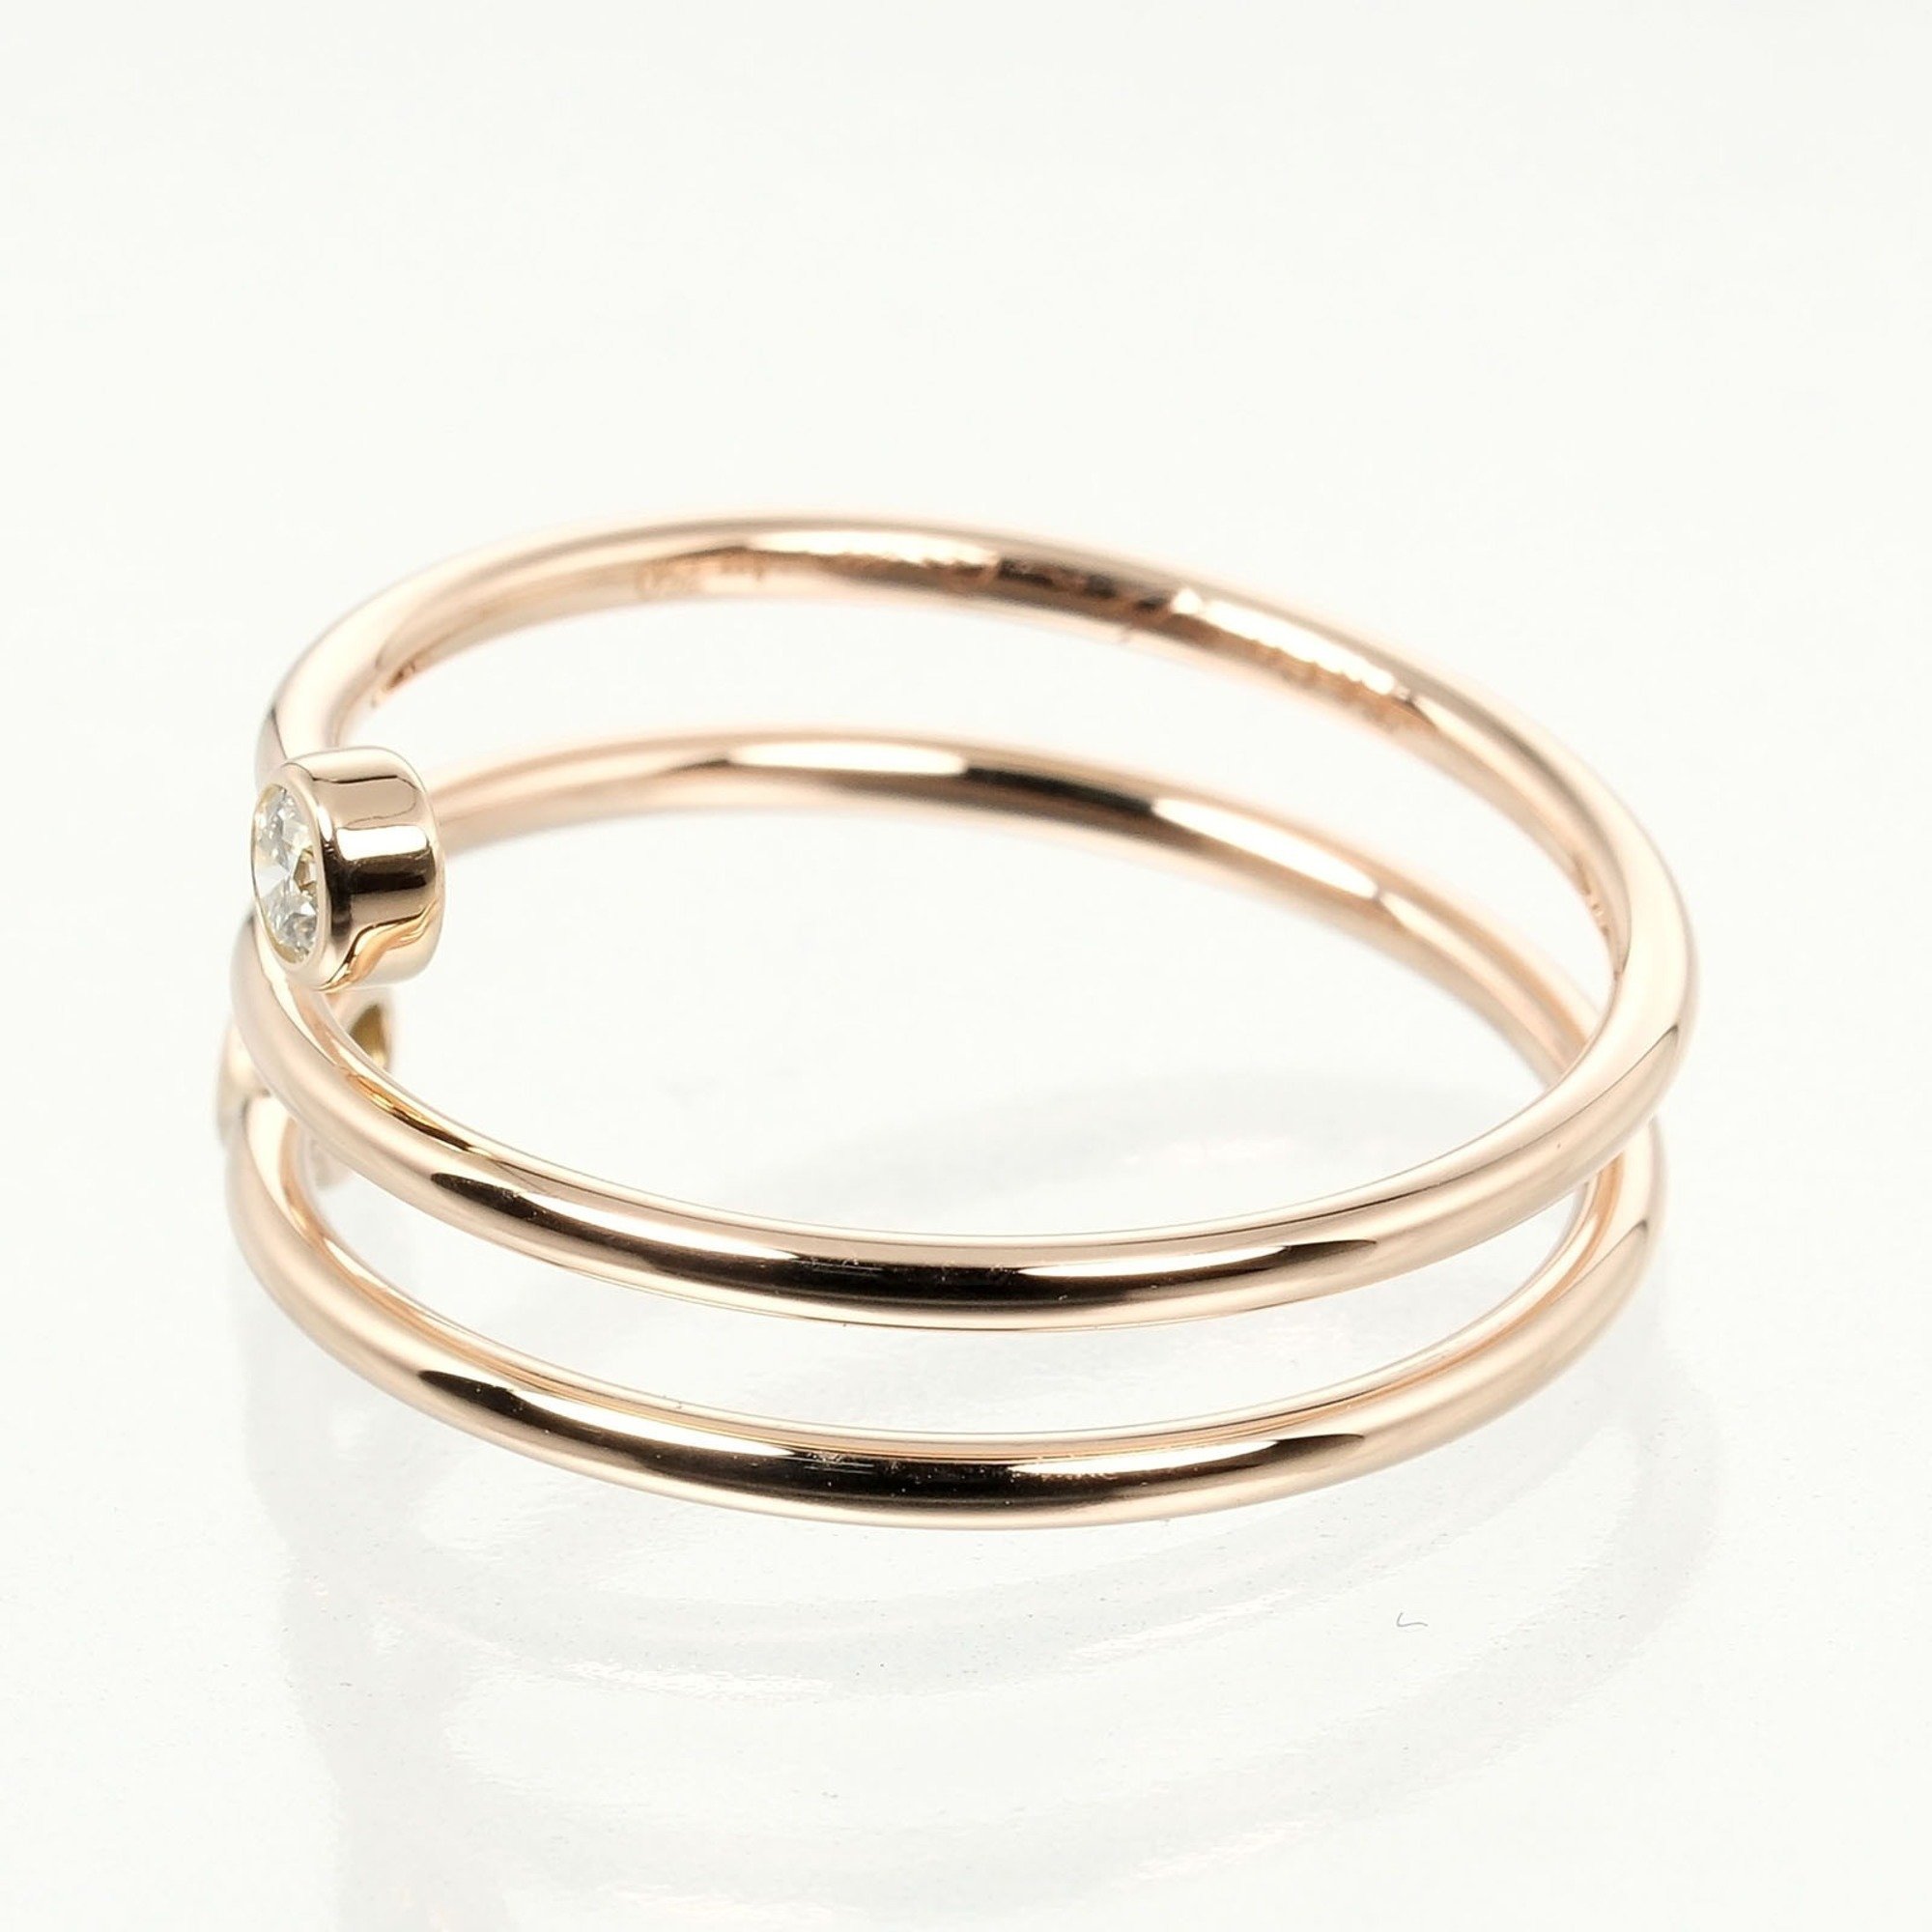 Tiffany & Co. Hoop 3-row size 10.5 ring, K18 PG pink gold, 2P diamond, approx. 2.26g I132124026